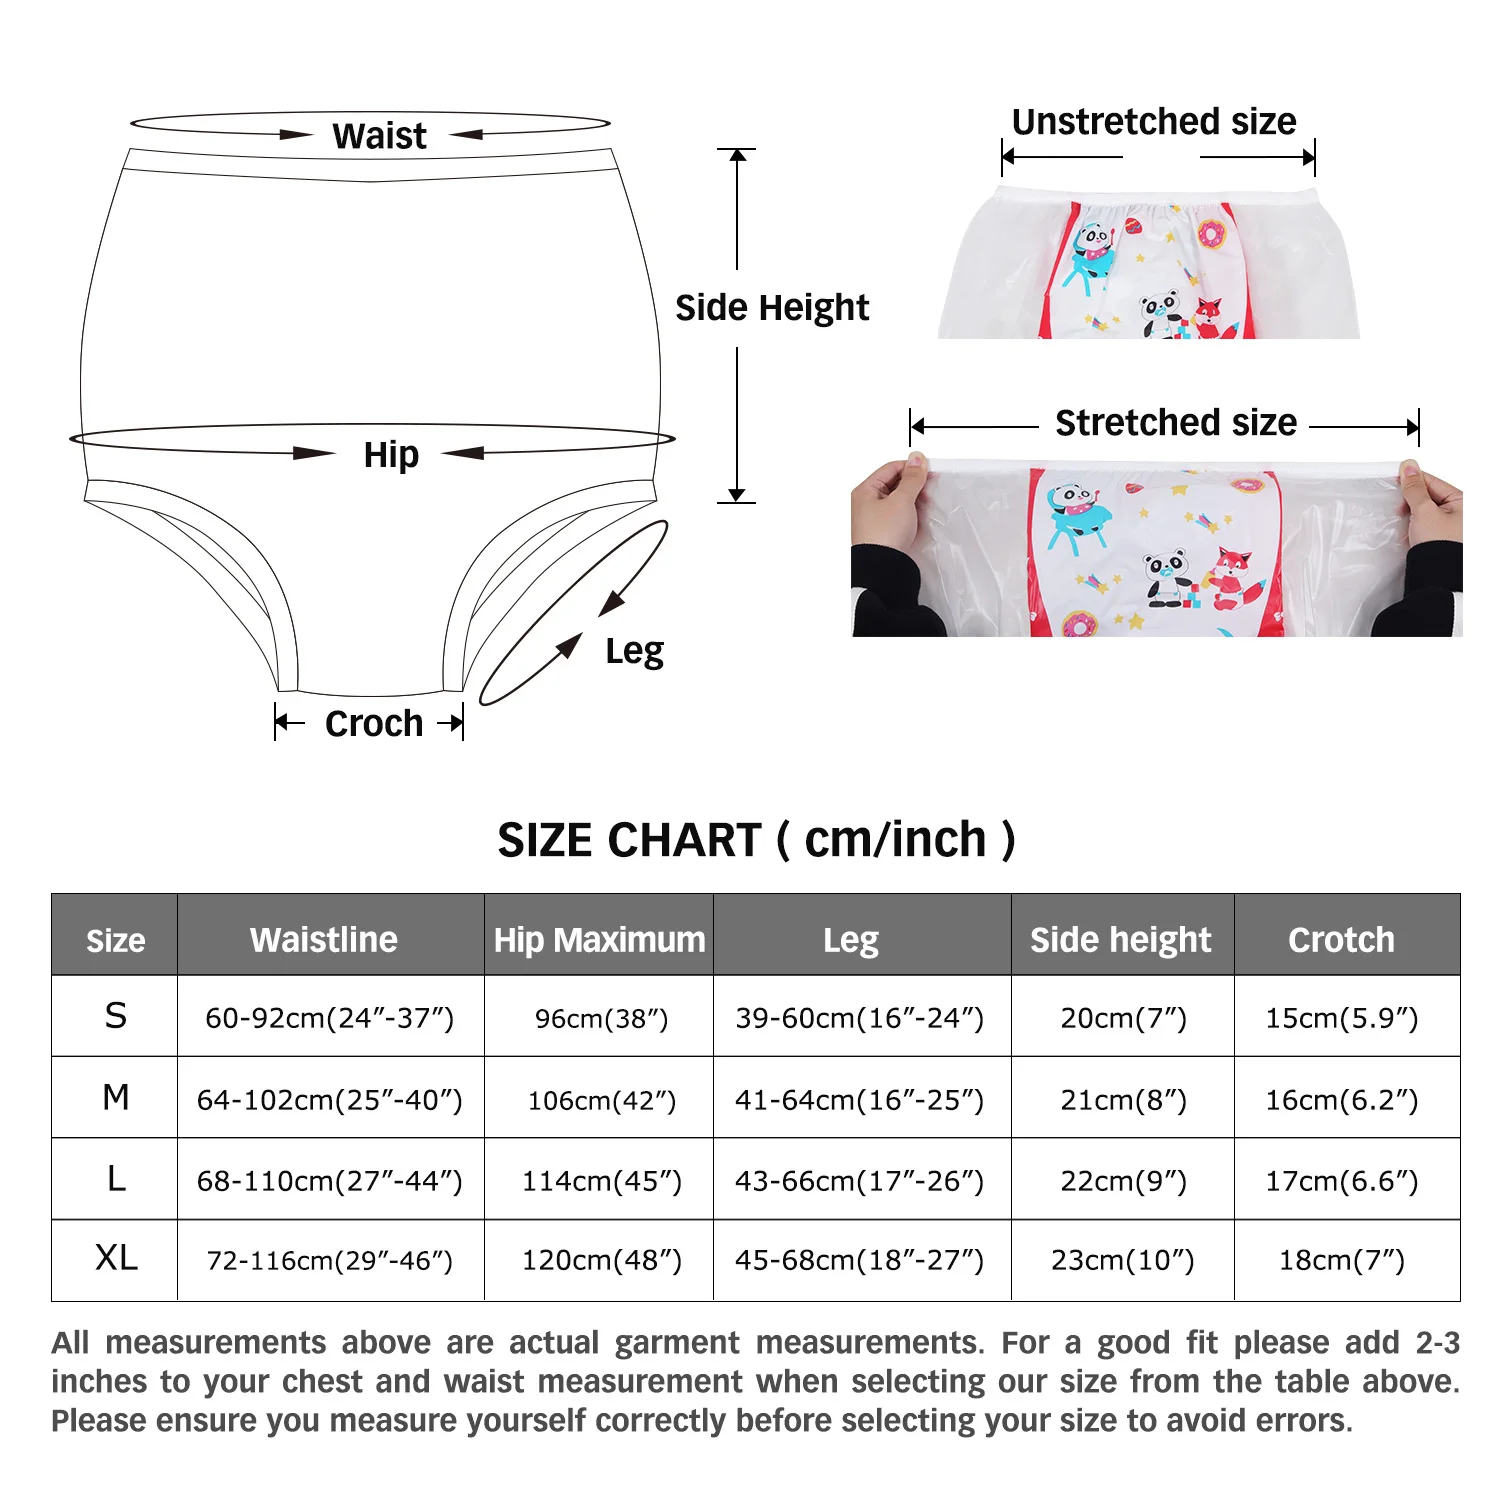 2PCS abdl adult diapers pvc reusable baby pants diapers onesize plastic bikini pants ddlg adult baby new underwear diapers dummy images - 6